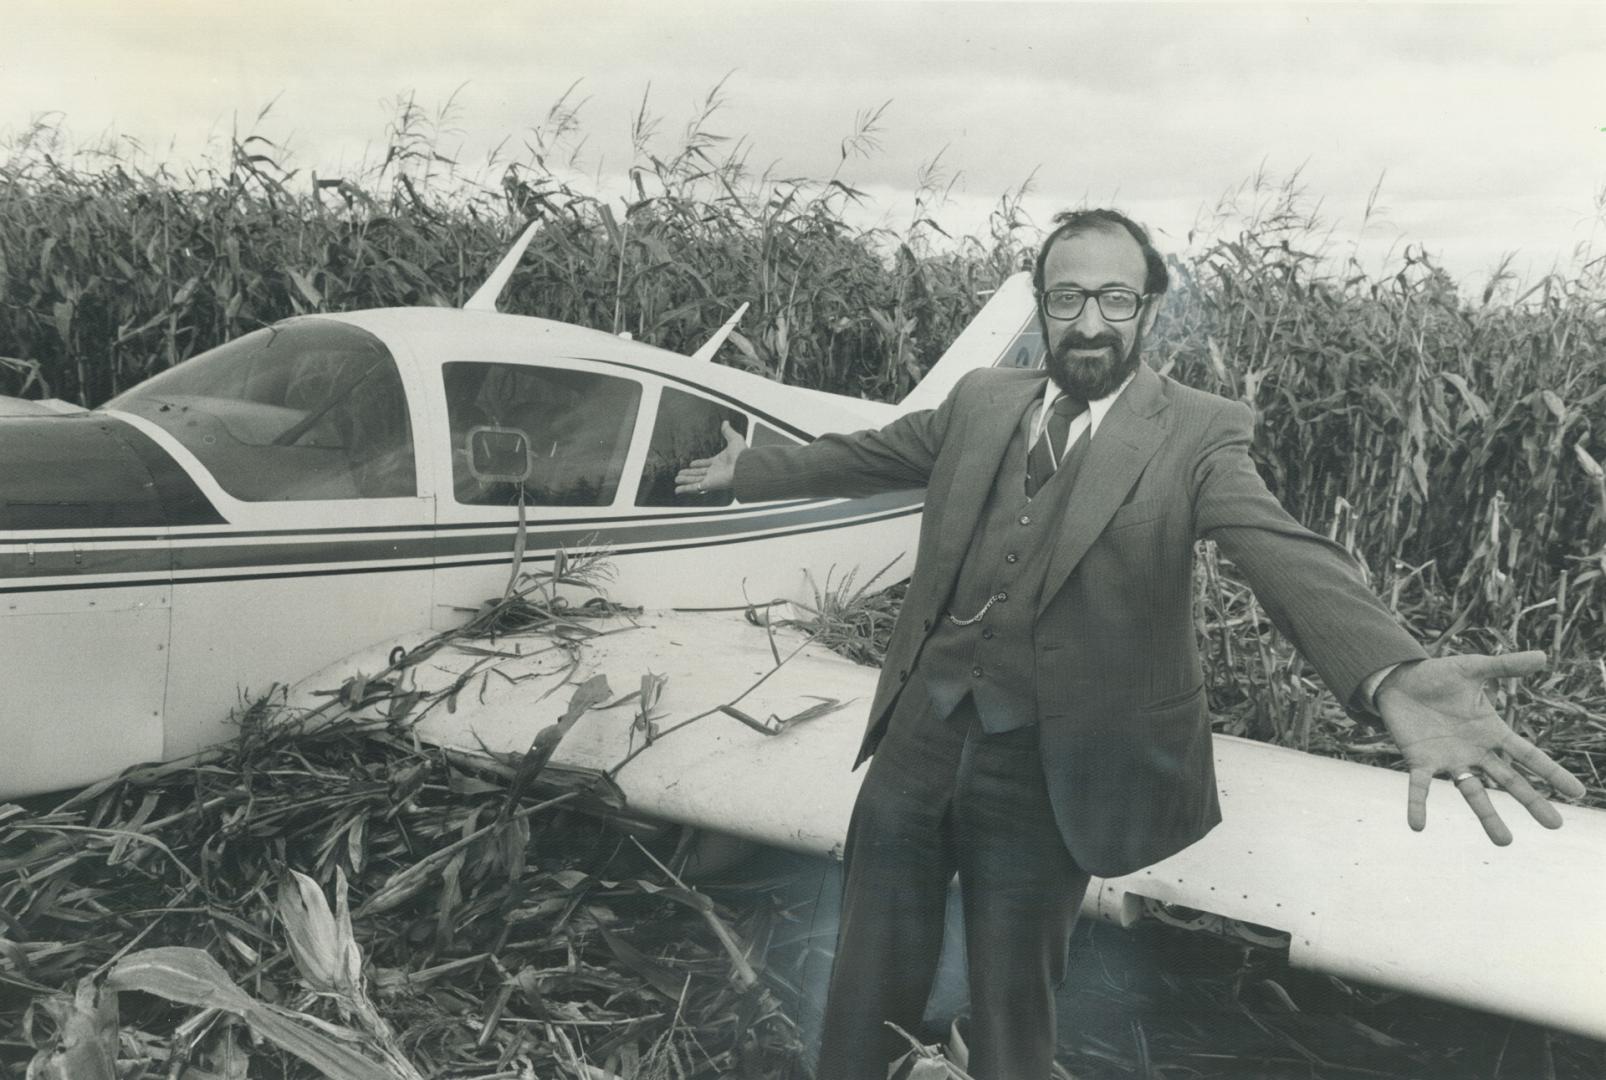 Doctor's dilemma, Dr. Andreas Haralampides, 40, of Uxbridge throws up his hands at his crashed plane after making a forced landing in a cornfield near Markham. His Passenger, Gordon Land, 37, of Oshawa had only six months ago made ago made a similar forced landing in a Mississauga field with Haralampides piloting the same plane.